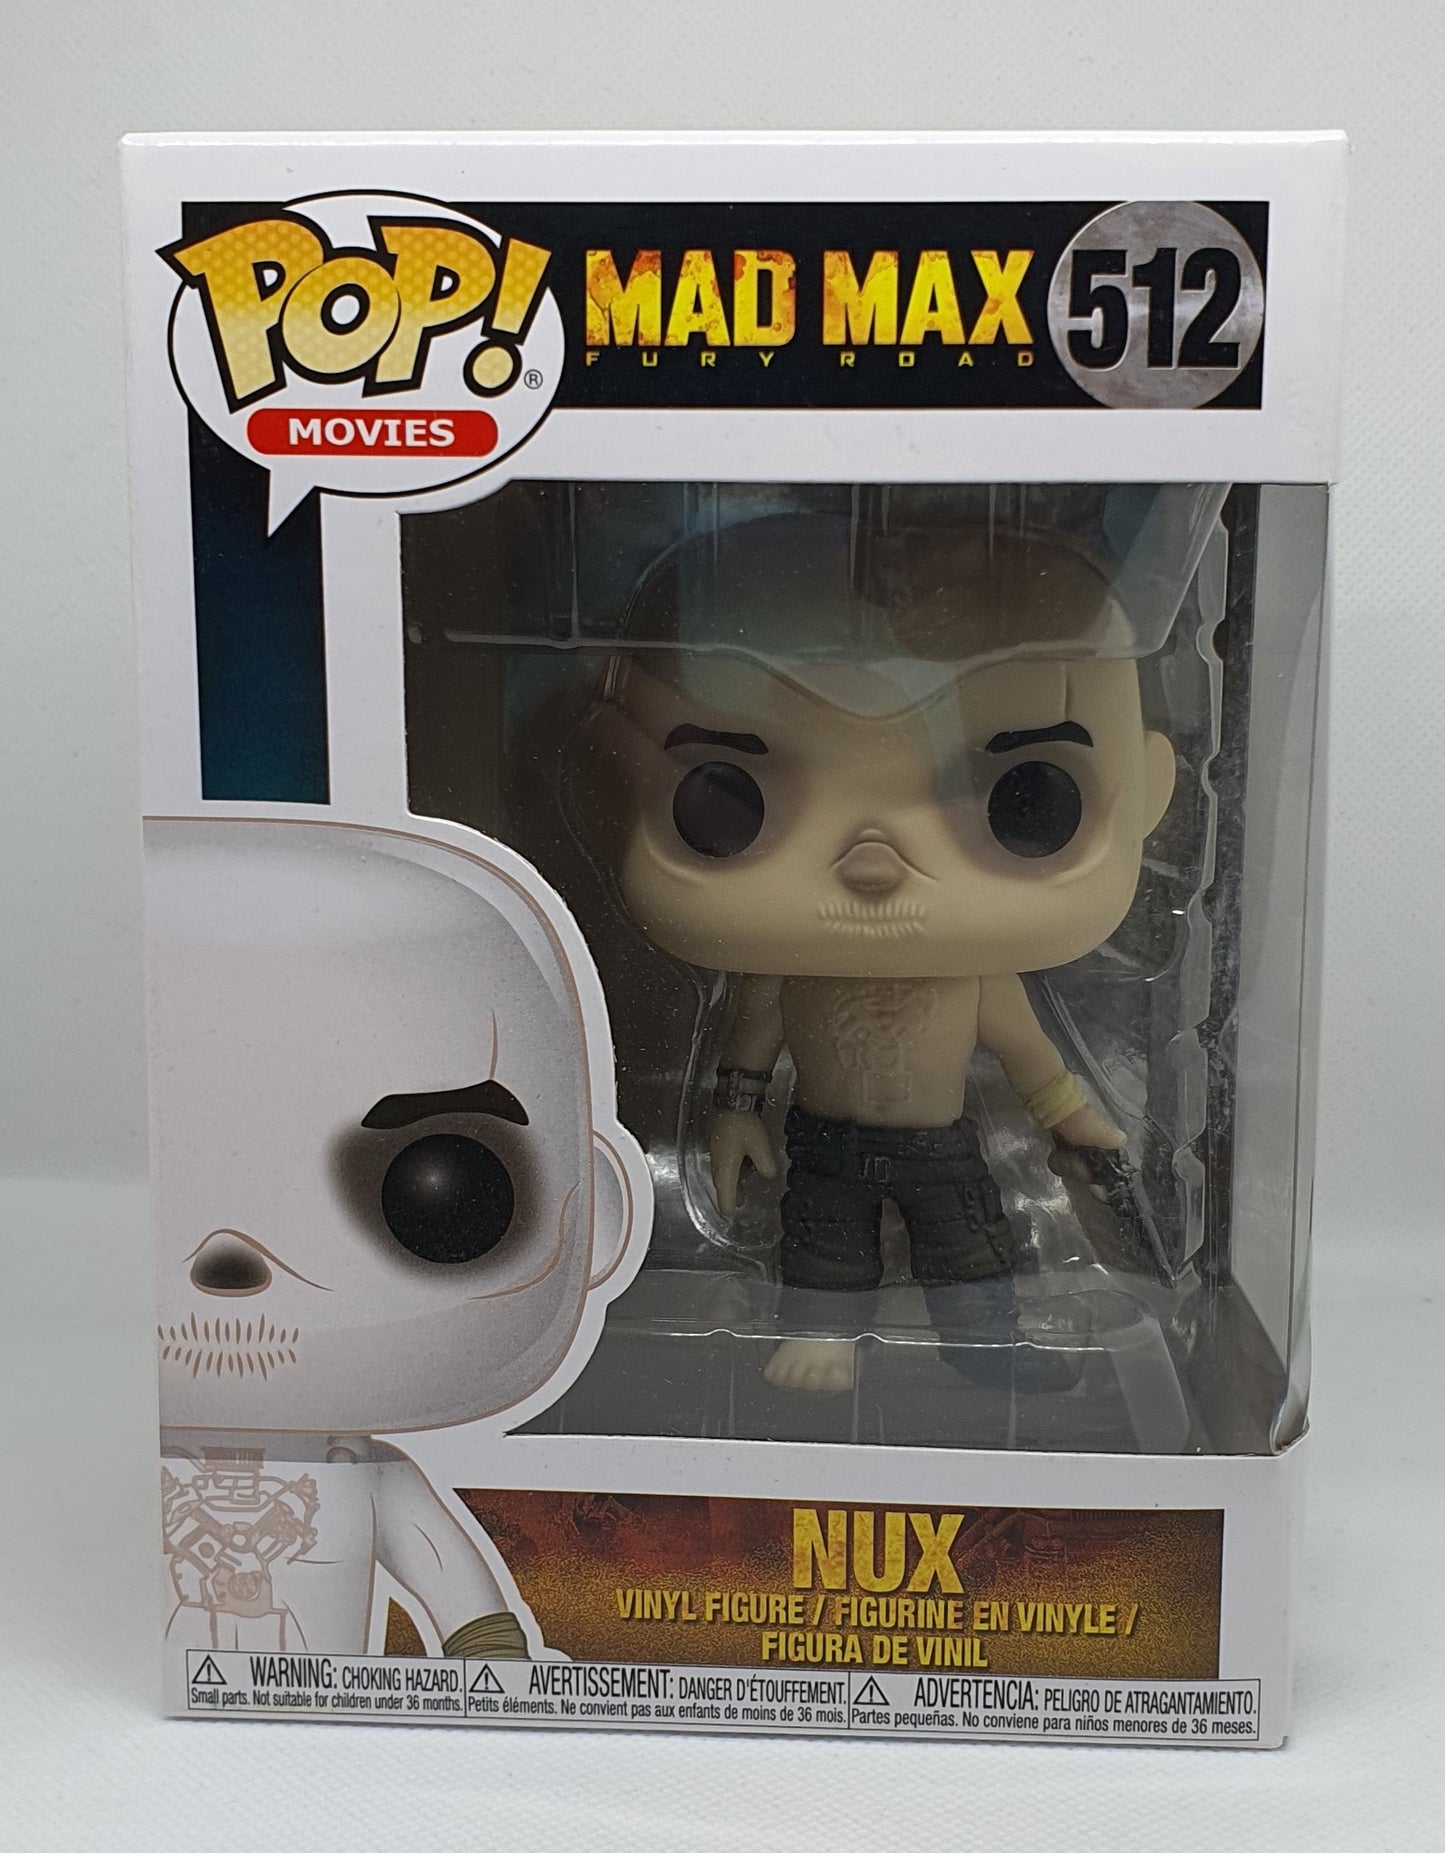 512 - MOVIES - MAD MAX - NUX